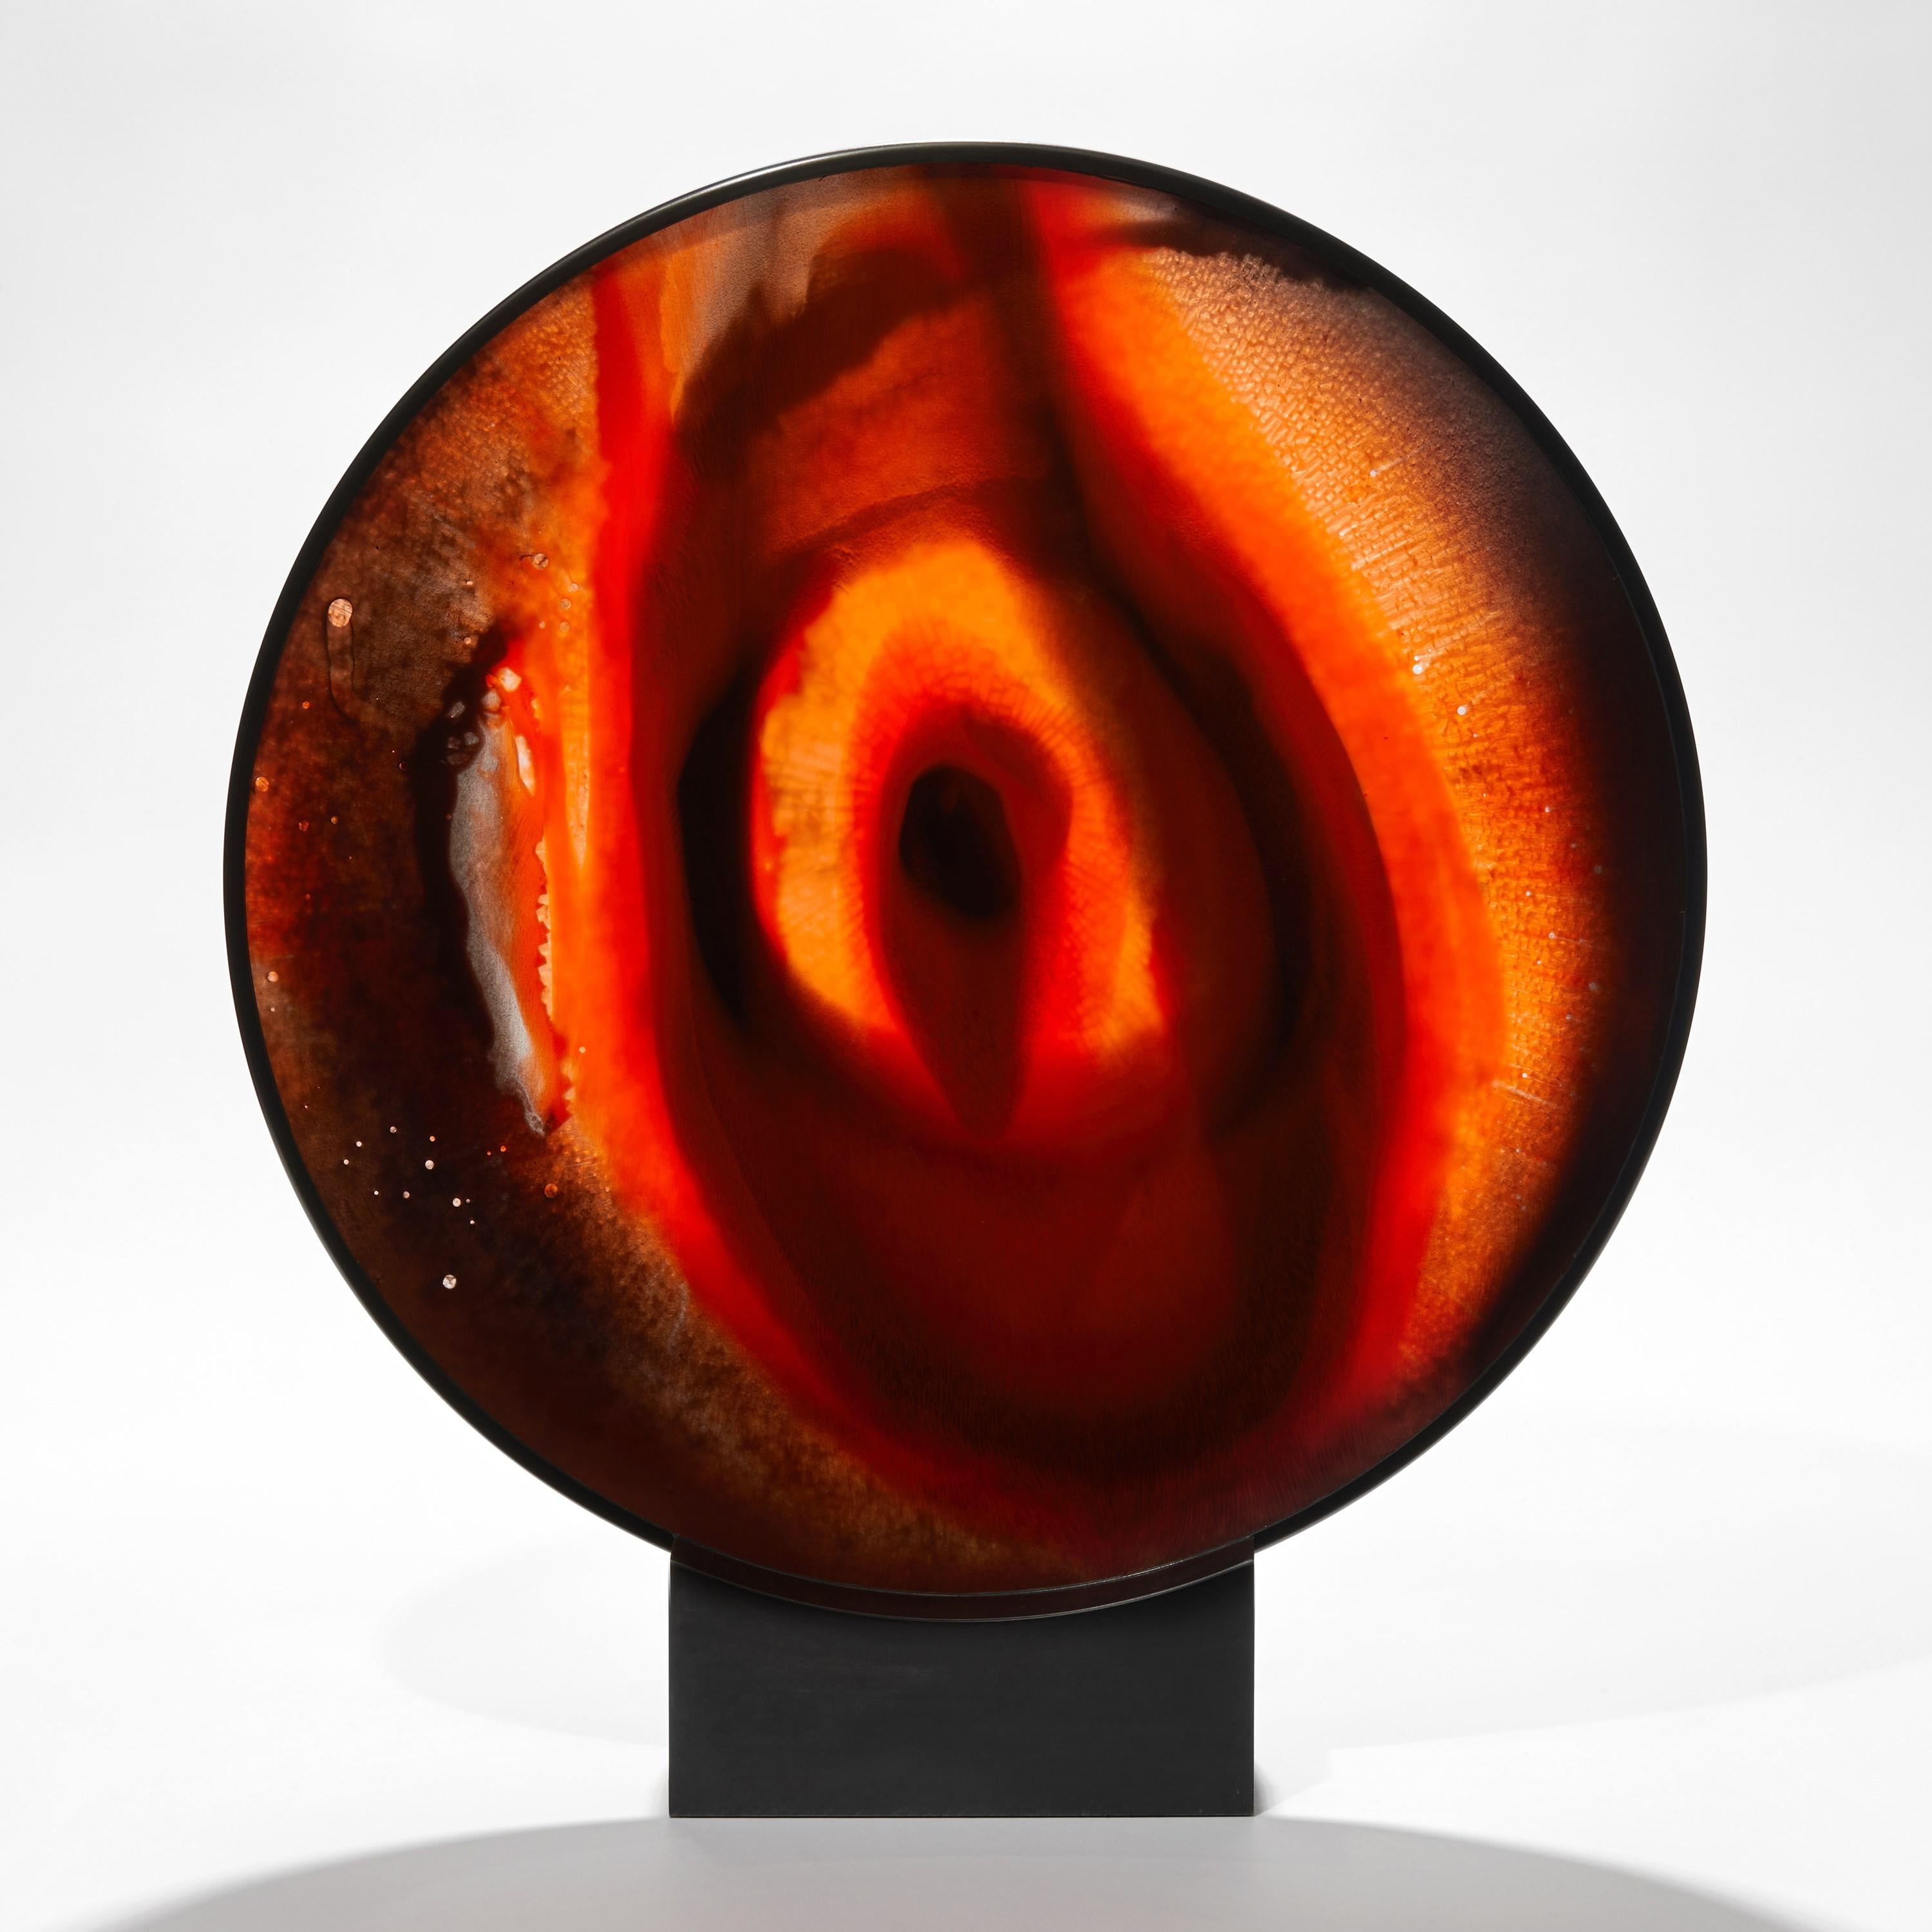 Organic Modern Eye of Bravery, a Red & Black Abstract Glass Artwork by Yorgos Papadopoulos For Sale